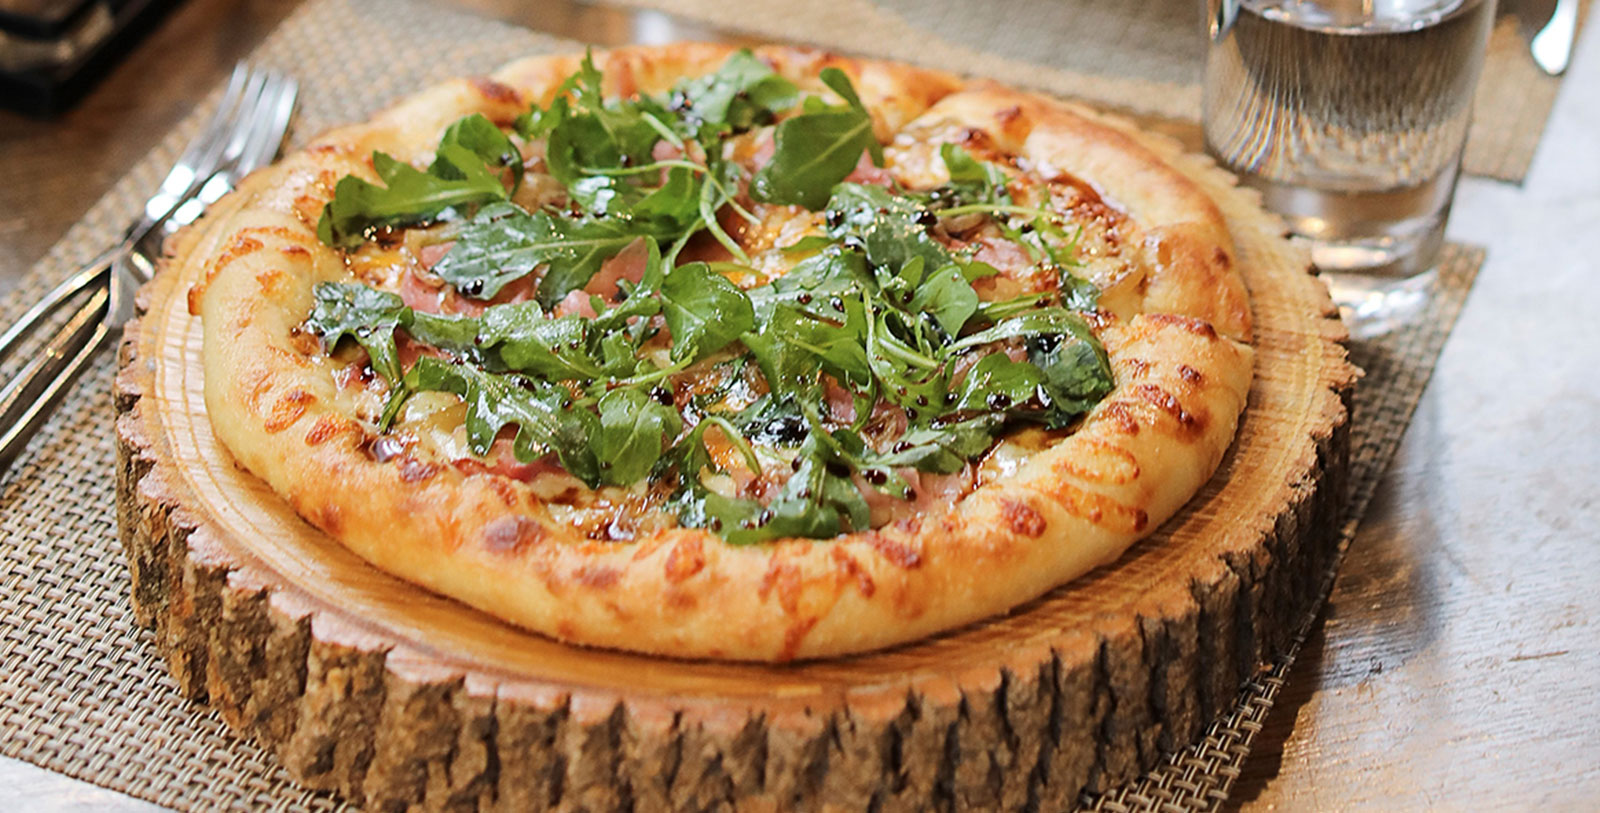 Taste some delicious craft pizza at Woody's.